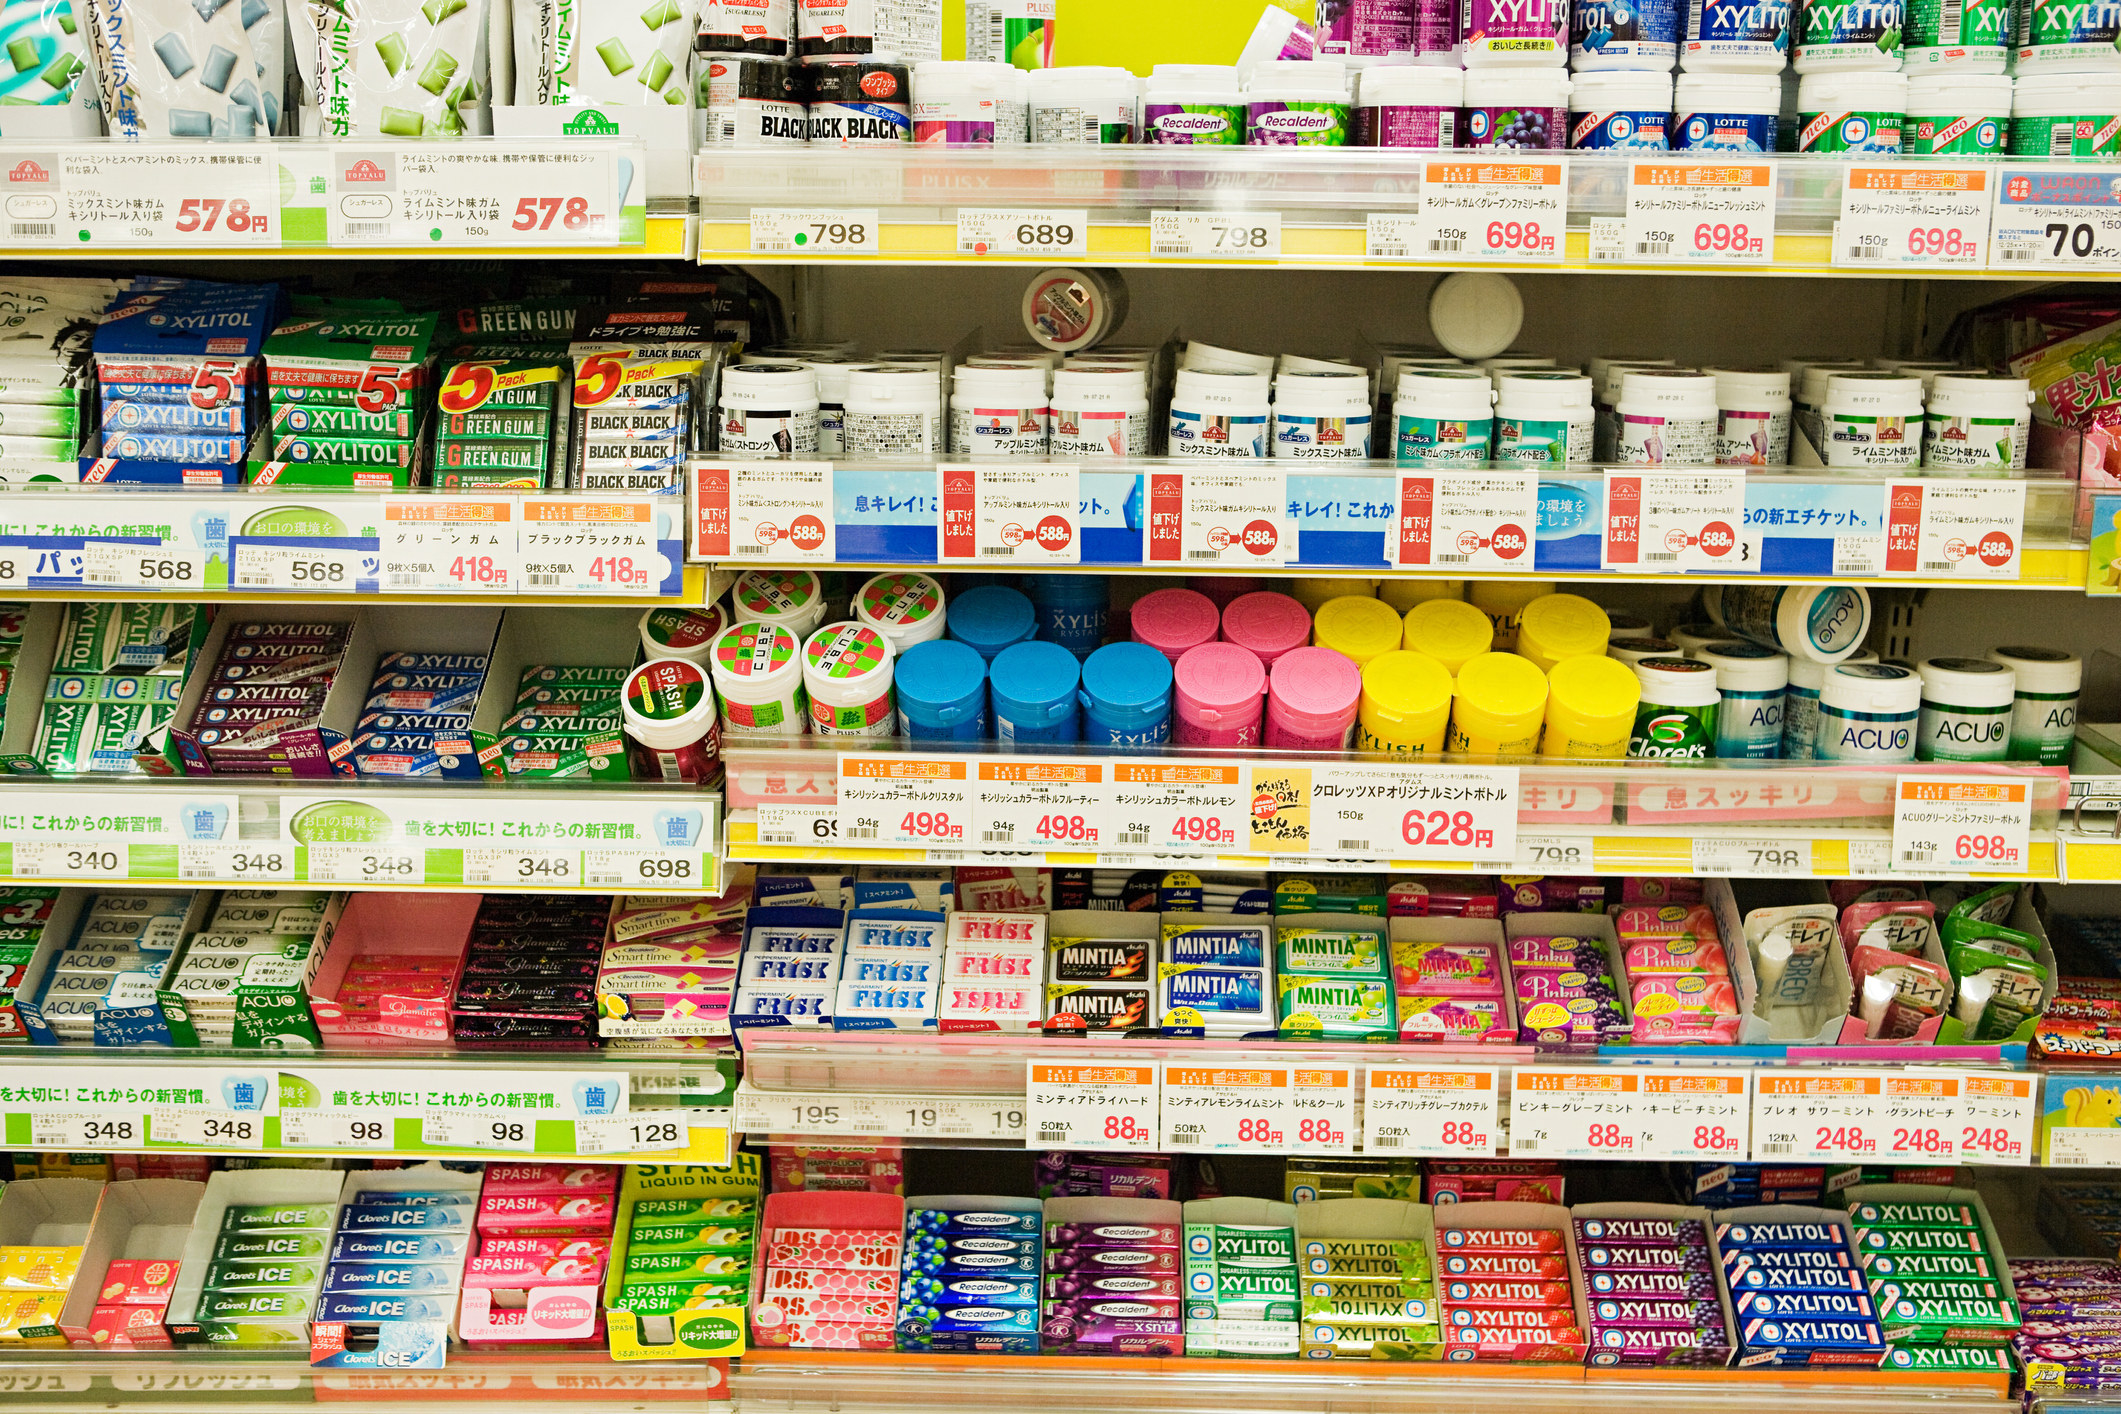 A display of products, including packages of gum, in an aisle